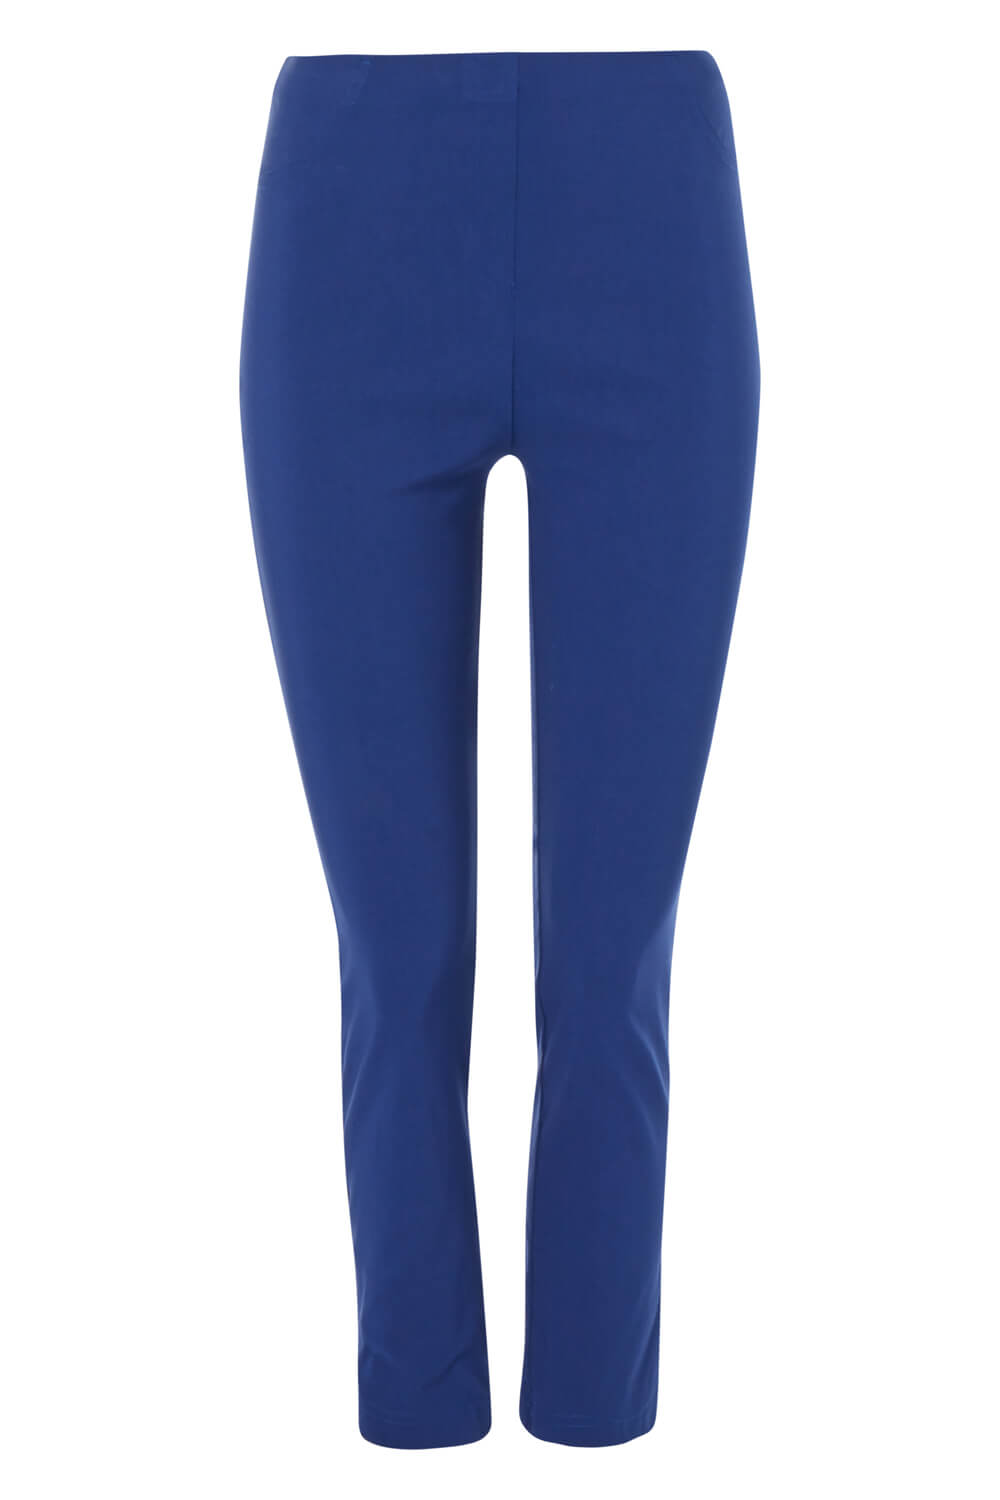 Midnight Blue 3/4 Length Stretch Trouser, Image 5 of 5